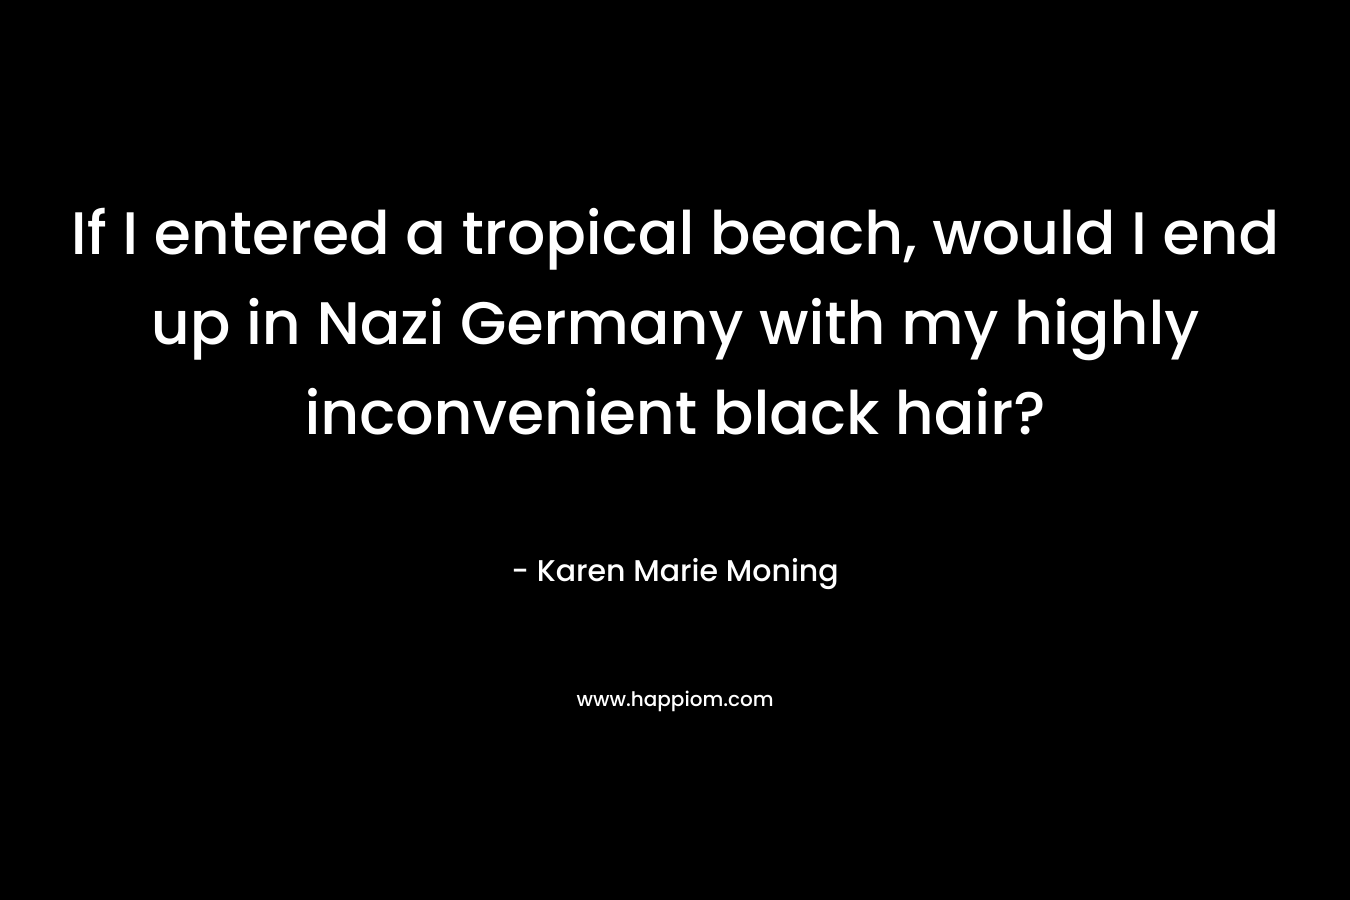 If I entered a tropical beach, would I end up in Nazi Germany with my highly inconvenient black hair?